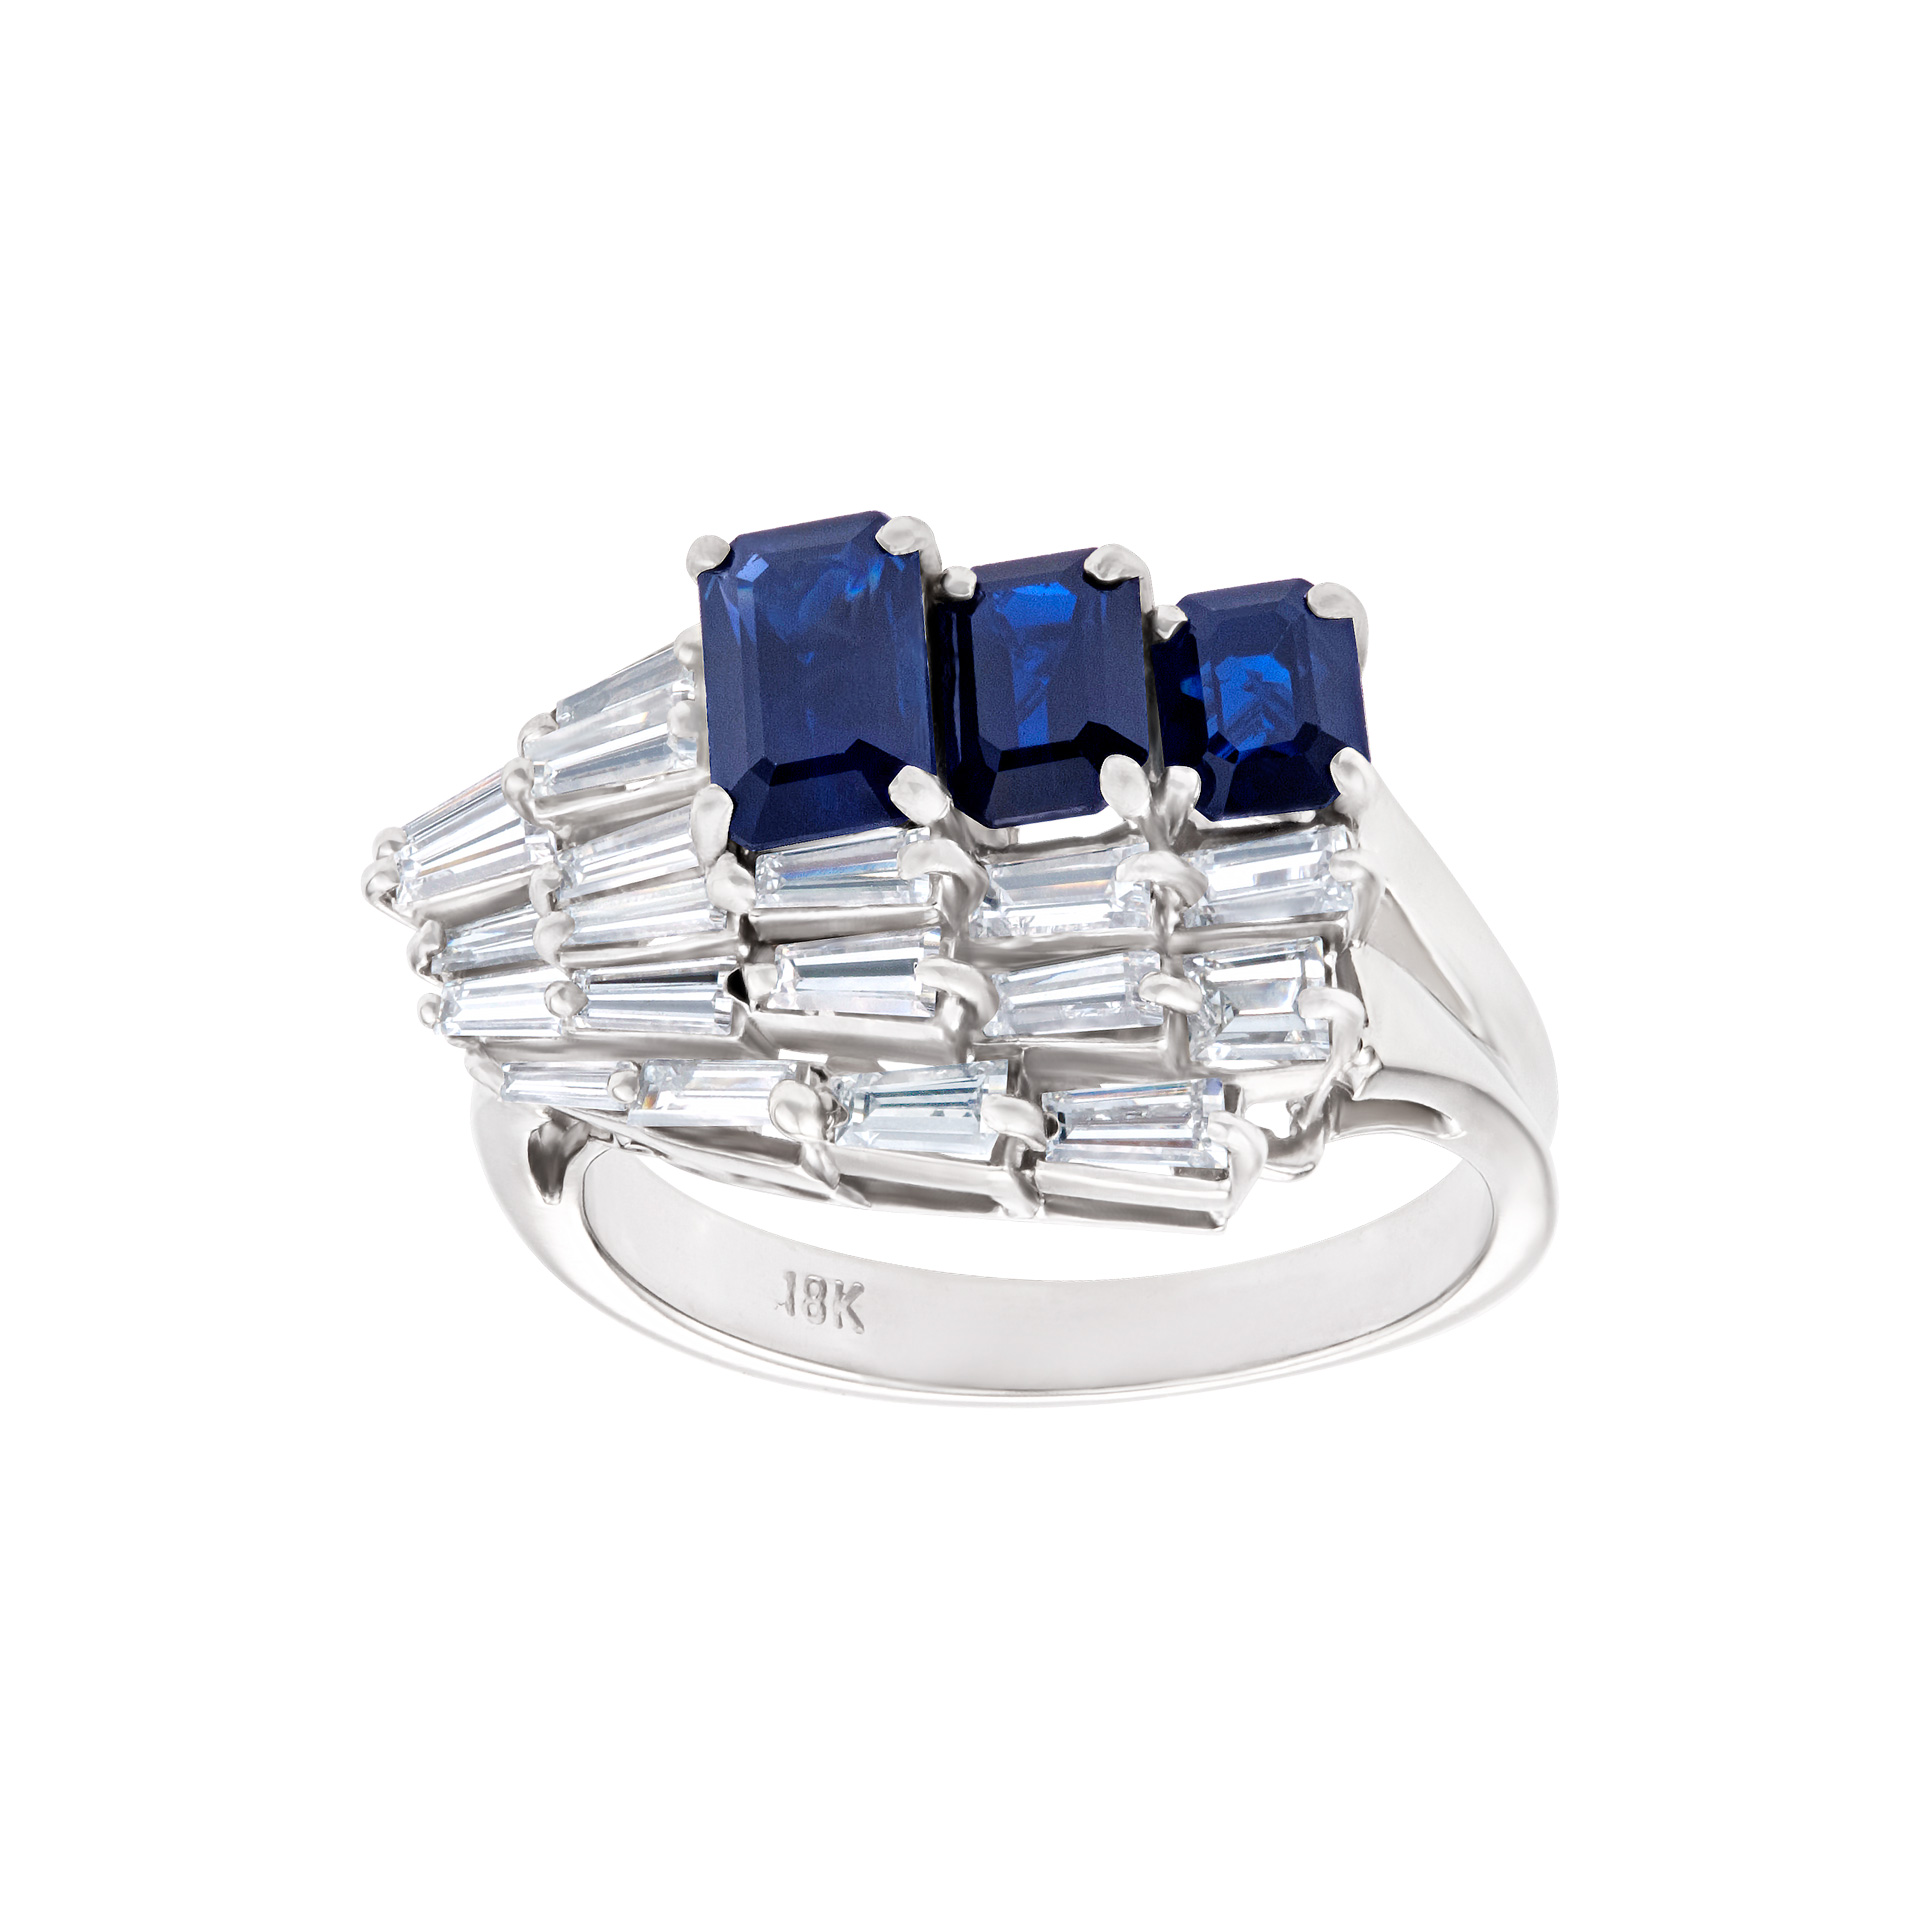 Diamond and sapphire ring in 18k white gold. 1.50 carats in diamonds. Size 5 image 1